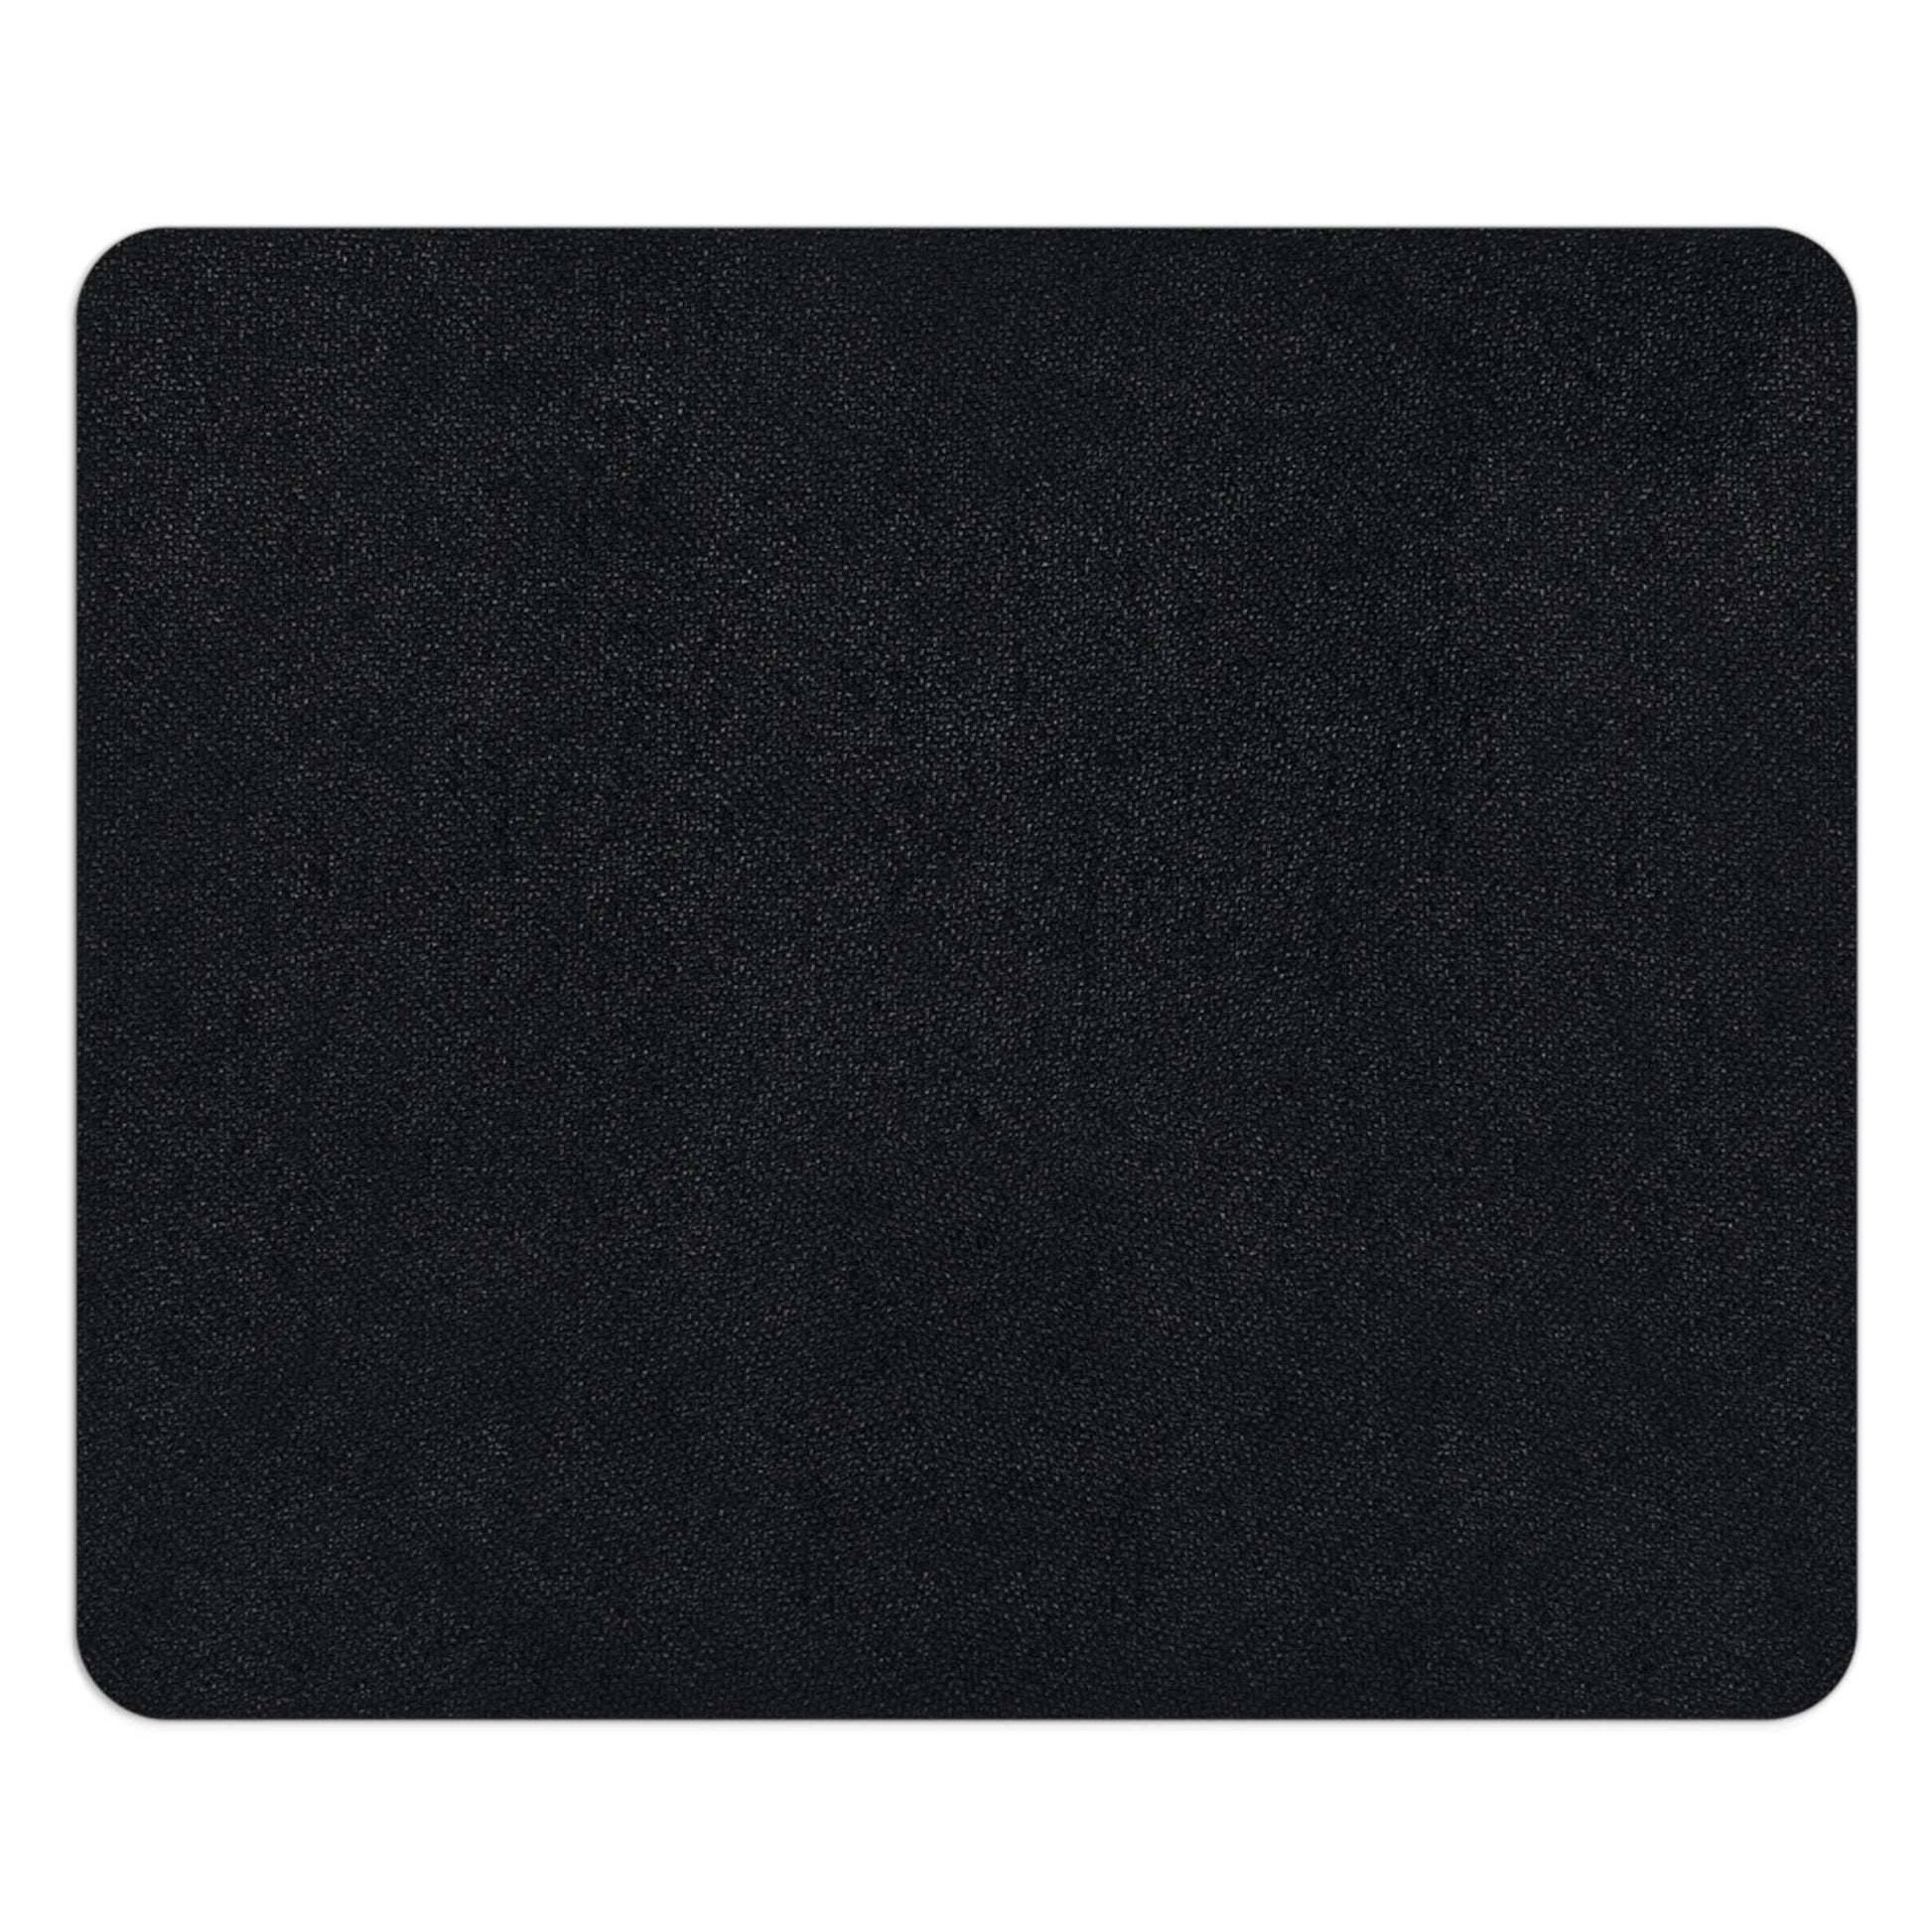 Computer Mouse Pad, Non-slip rubber bottom, White Flowers